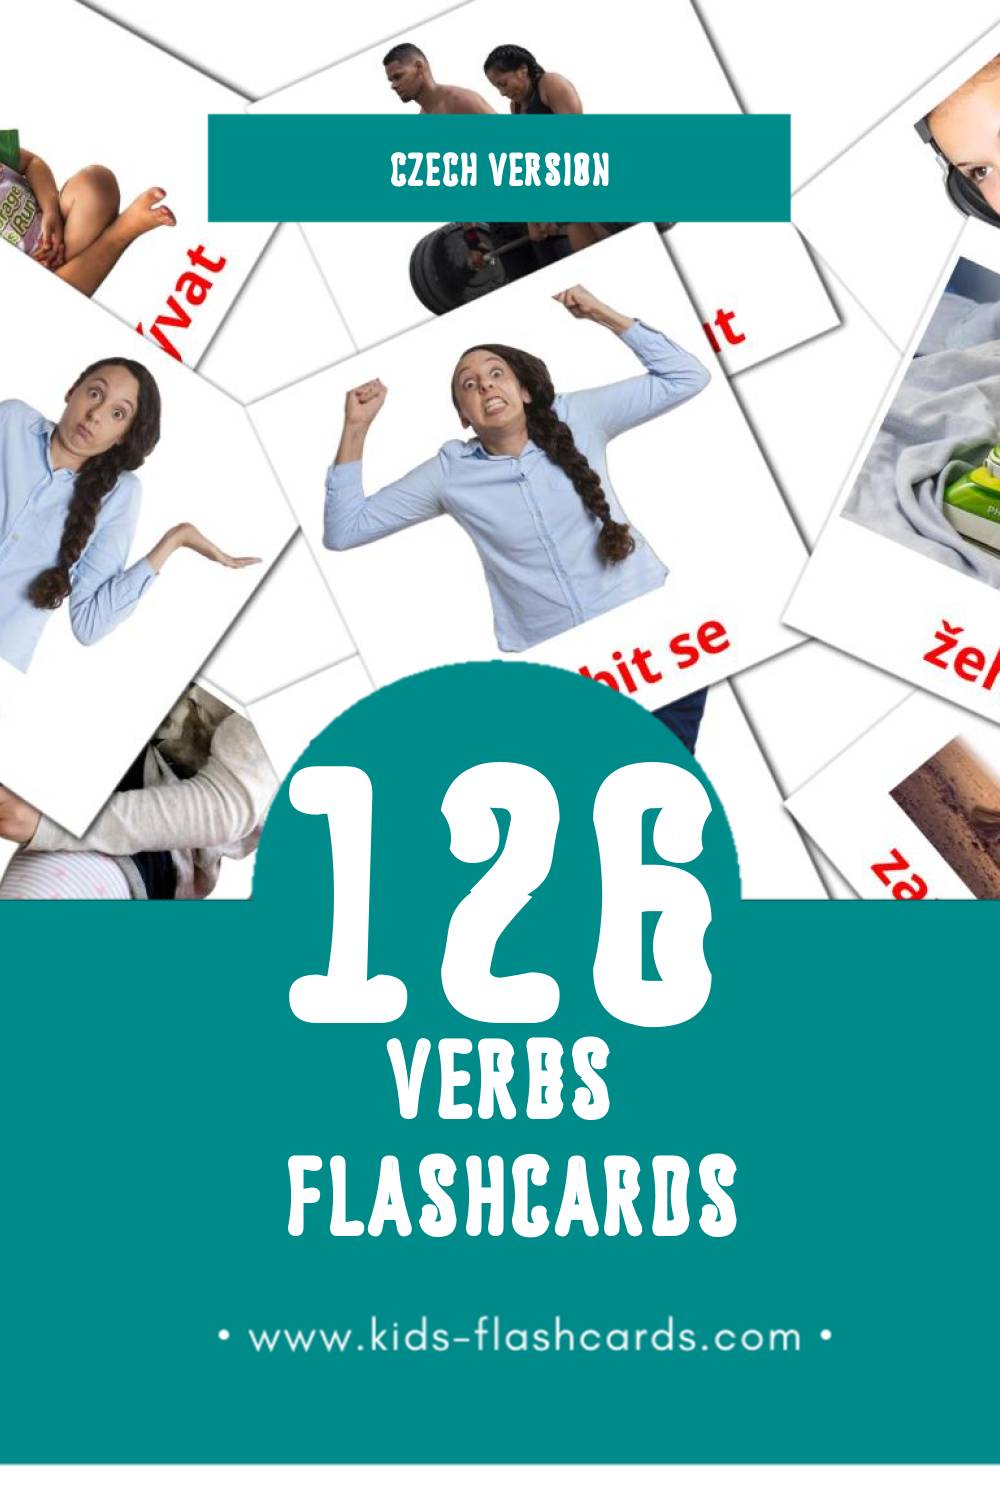 Visual Slovesa Flashcards for Toddlers (126 cards in Czech)